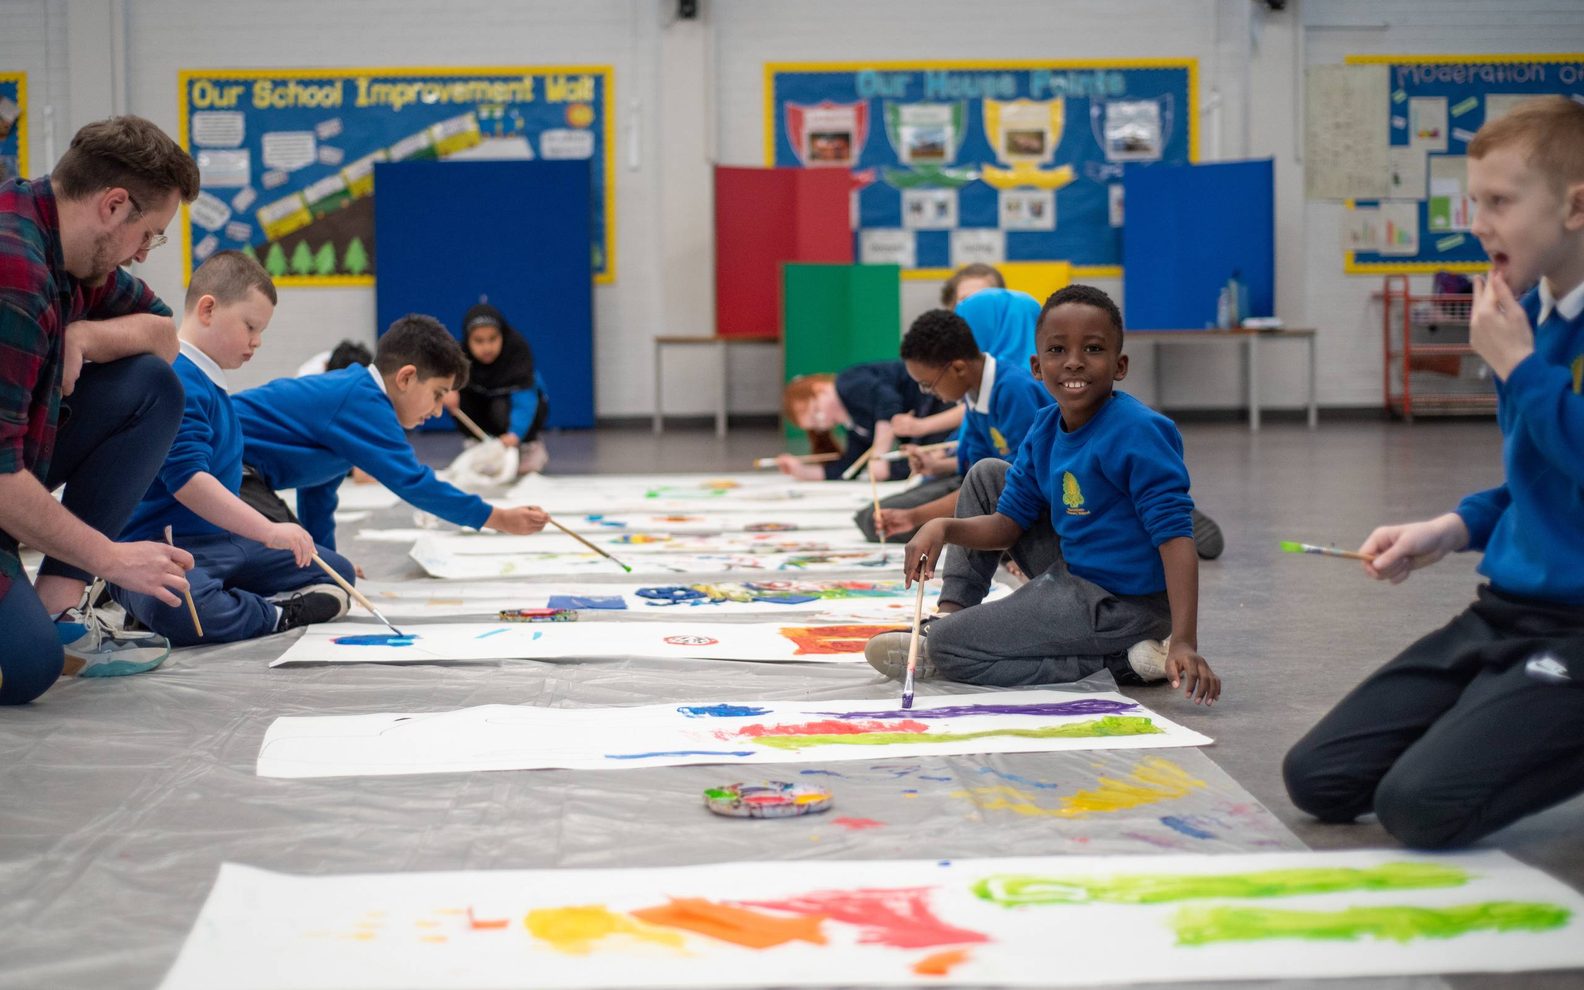 A group of primary pupils painting in bright colours on large sheets of paper on the floor of a school hall. They are wearing blue school uniforms.